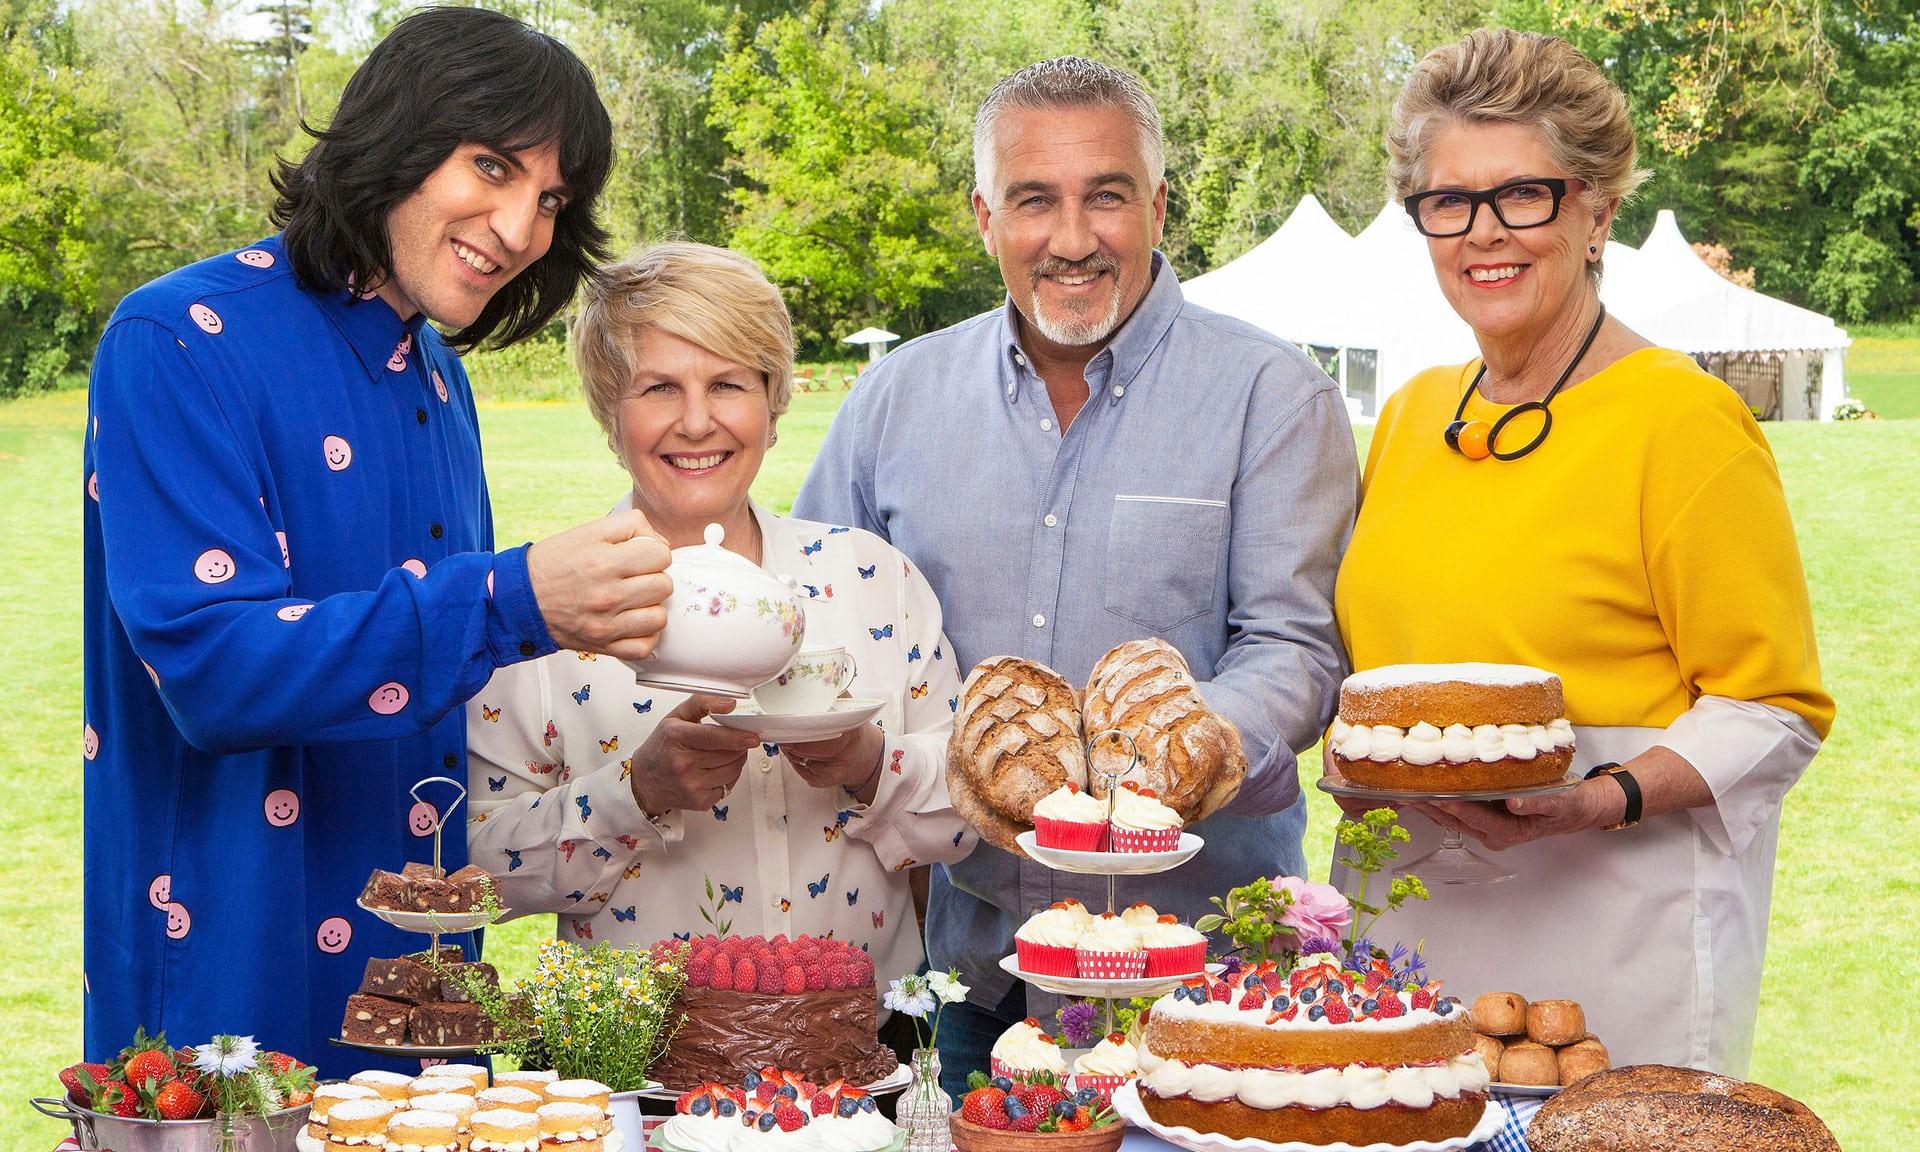 Great British Bake Off winner accidentally by Prue Leith on Twitter